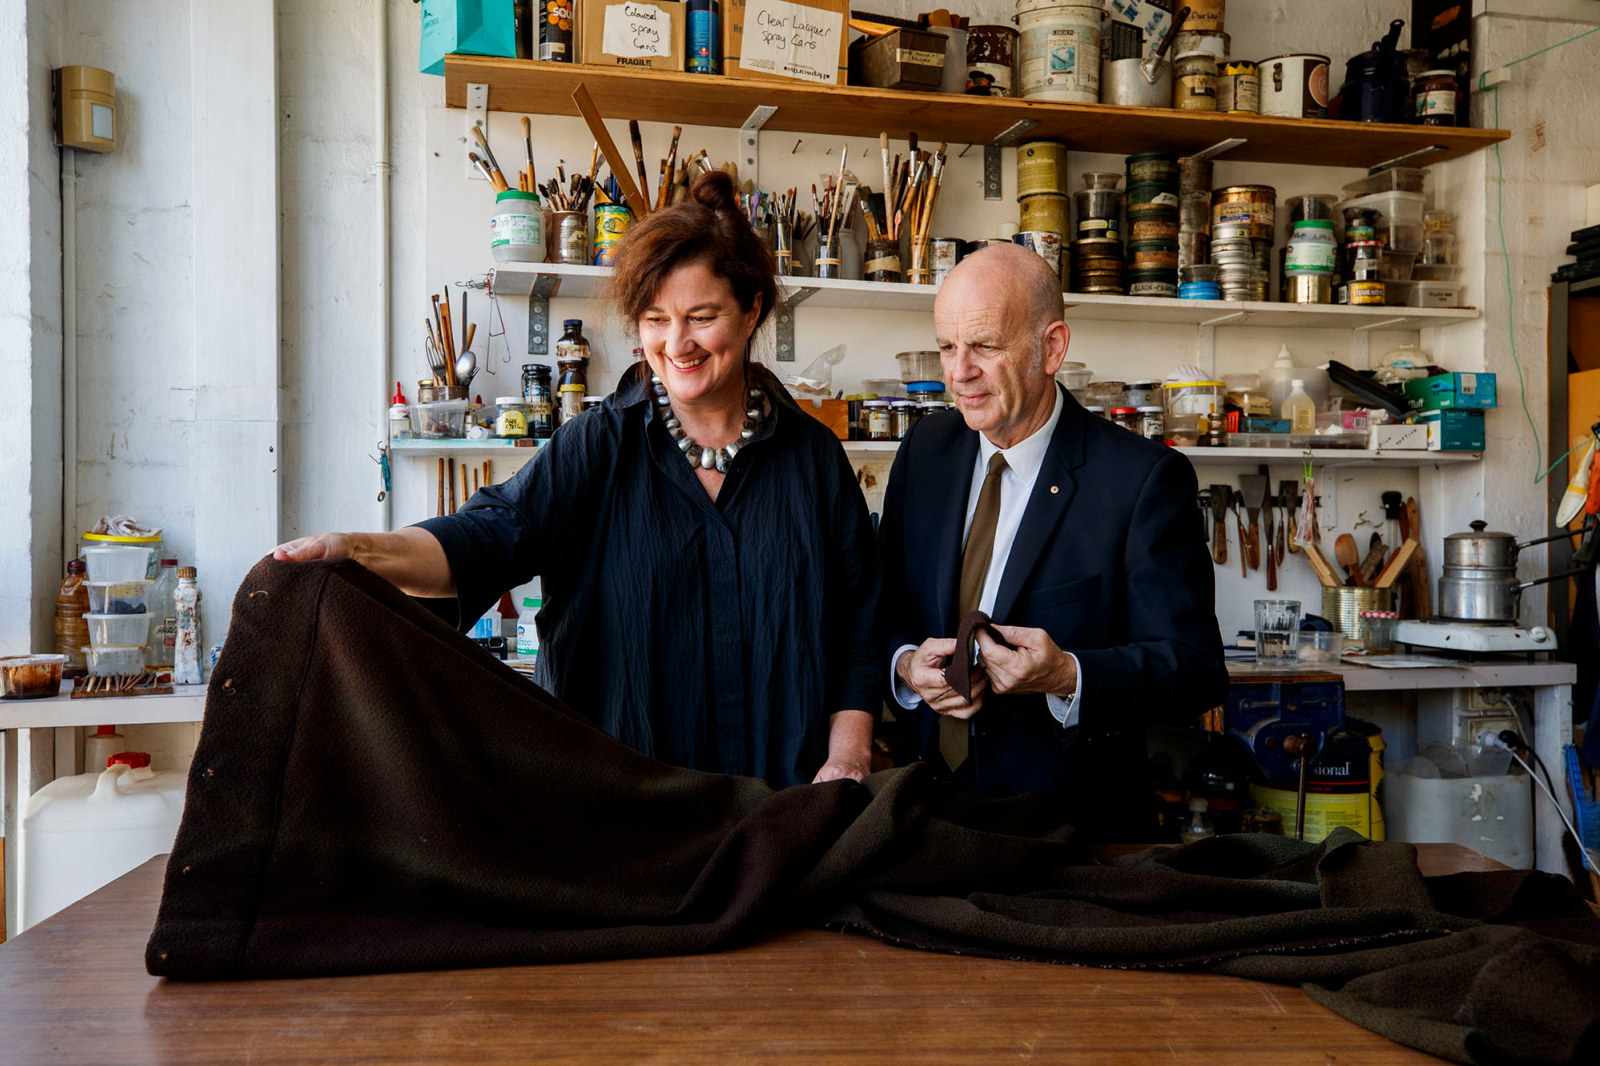 Curator Joanna Nicholas and Brian Seidler (son of Marcus Seidler) discussing the reupholstery of the Rose Seidler House couch on the premises of Ben Stoner Antiques Conservation & Restoration. 